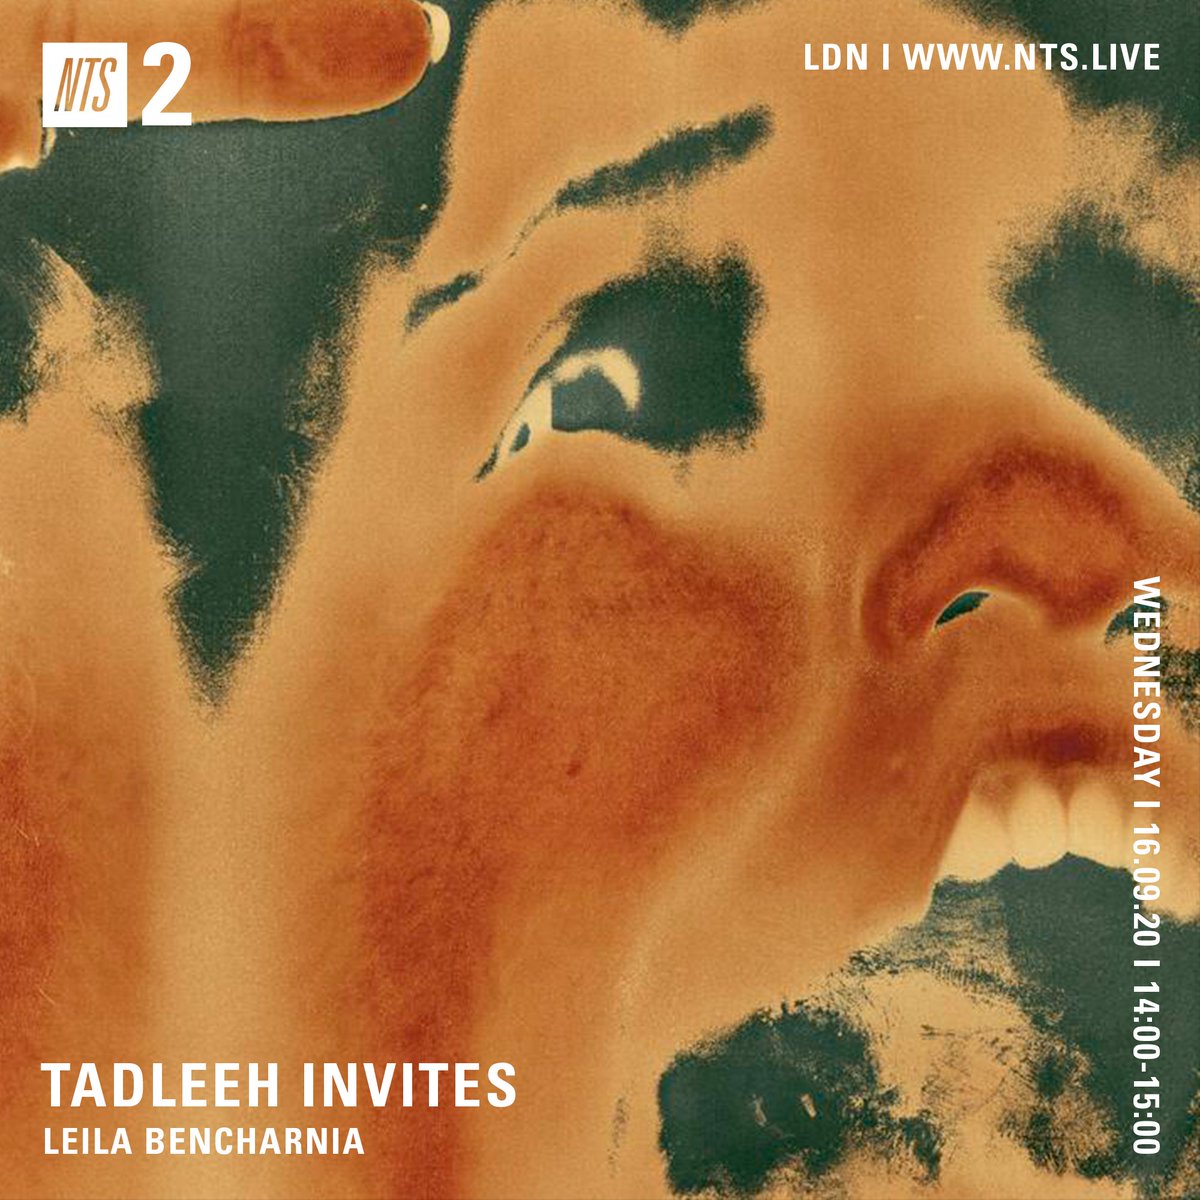 Moroccan artist and researcher Leila Bencharnia presents a deep vinyl + cassette session for the next hour, presented by @__Tadleeh__: nts.live/2